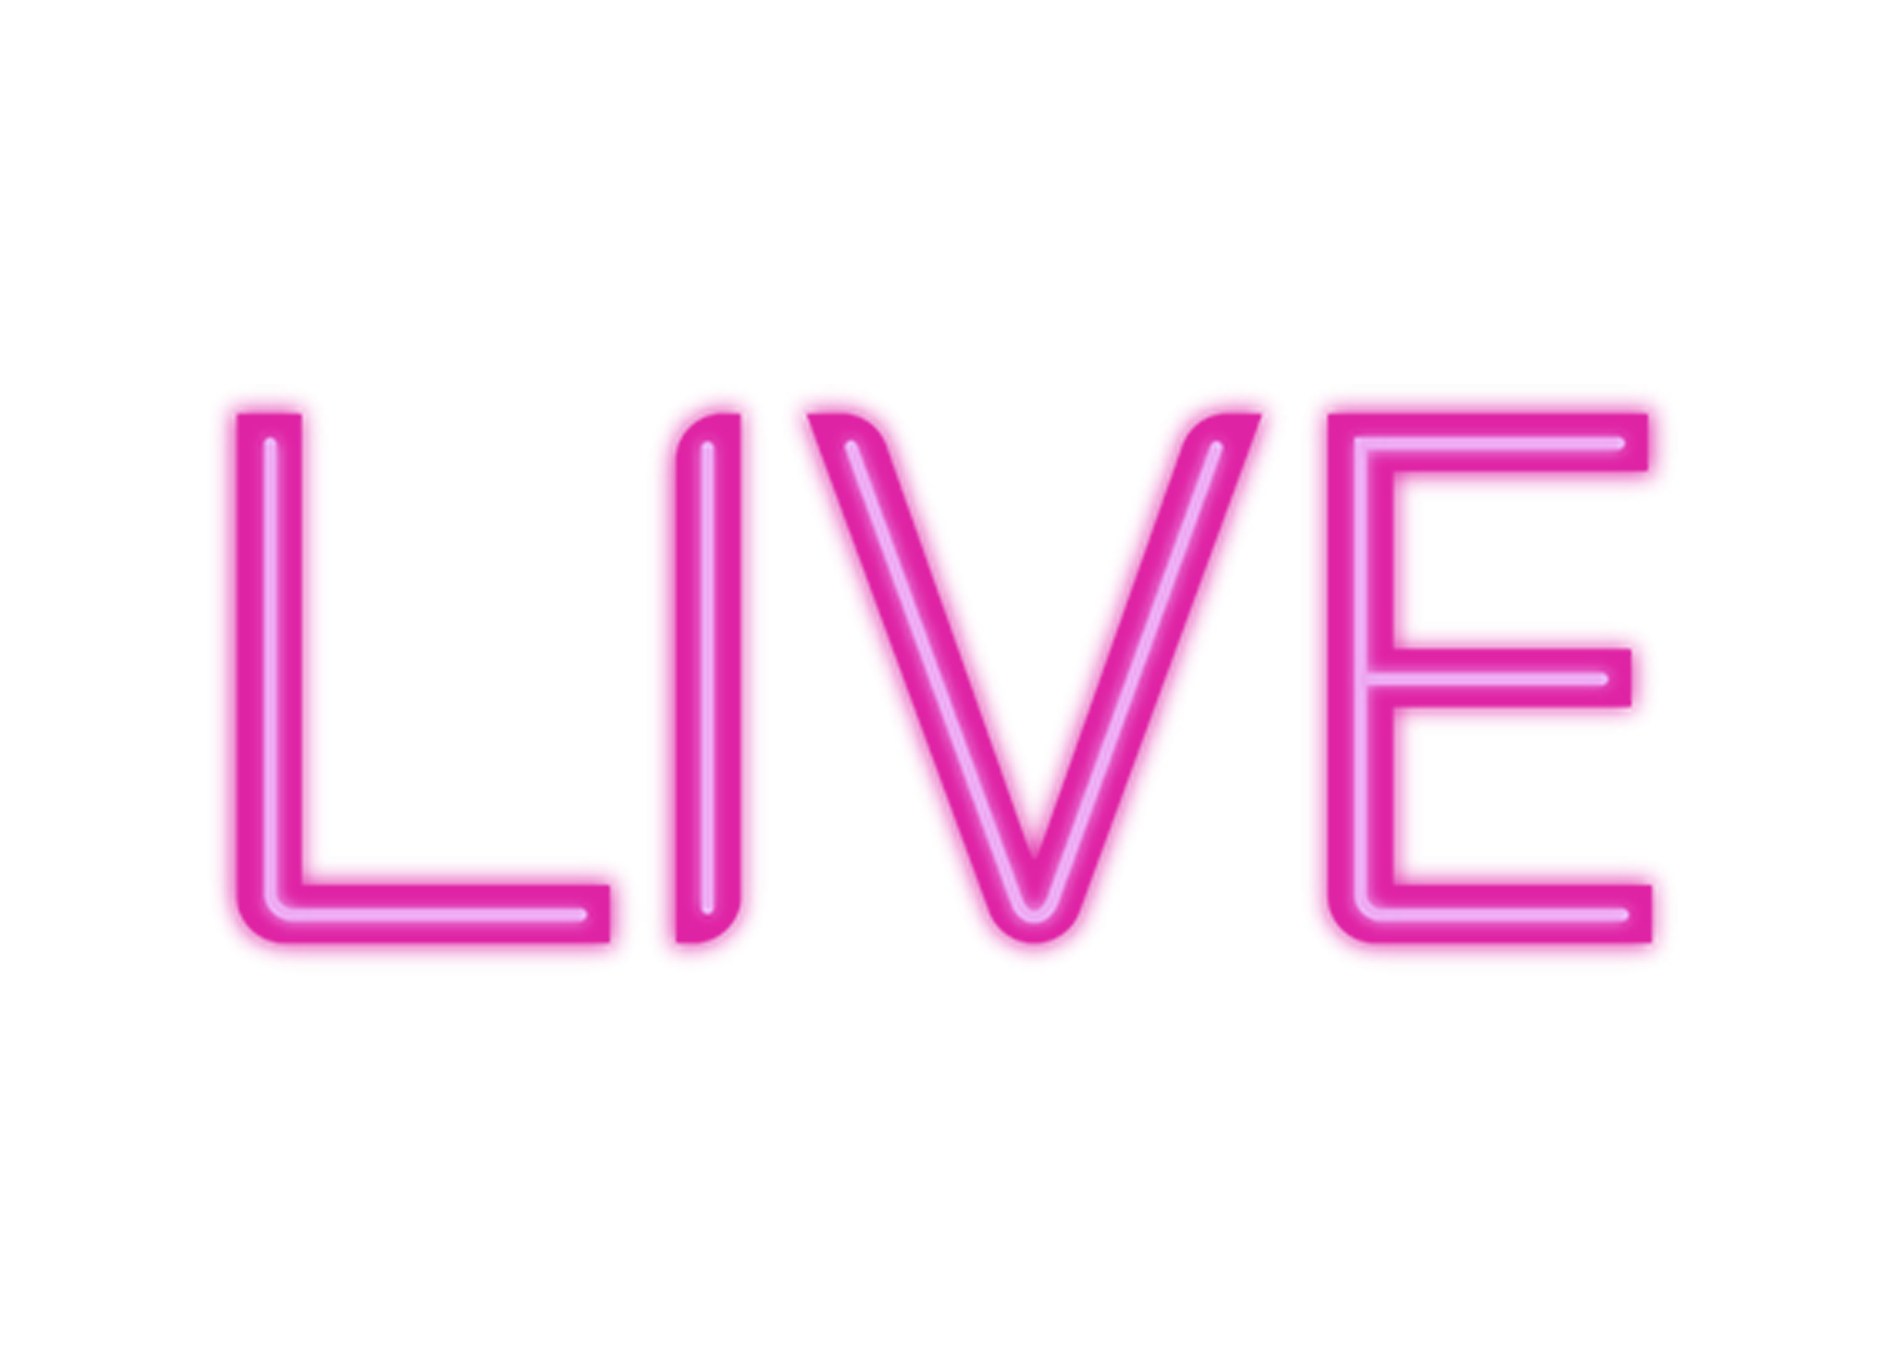 IGN LIVE Tickets Now on Sale!